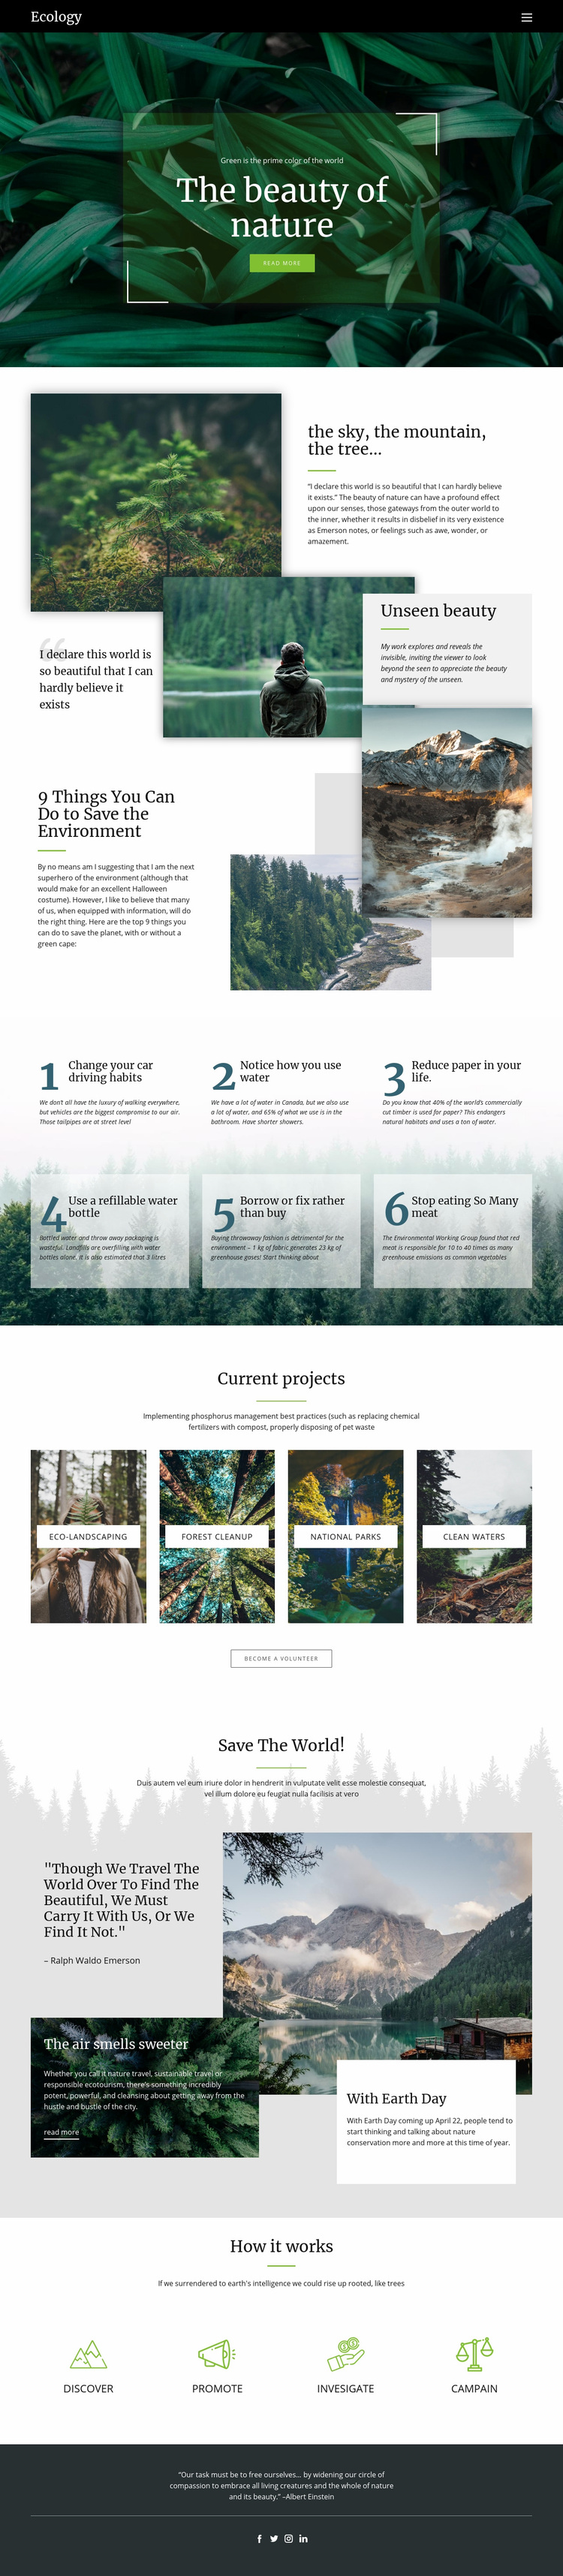 Skies and beauty of nature Web Page Designer